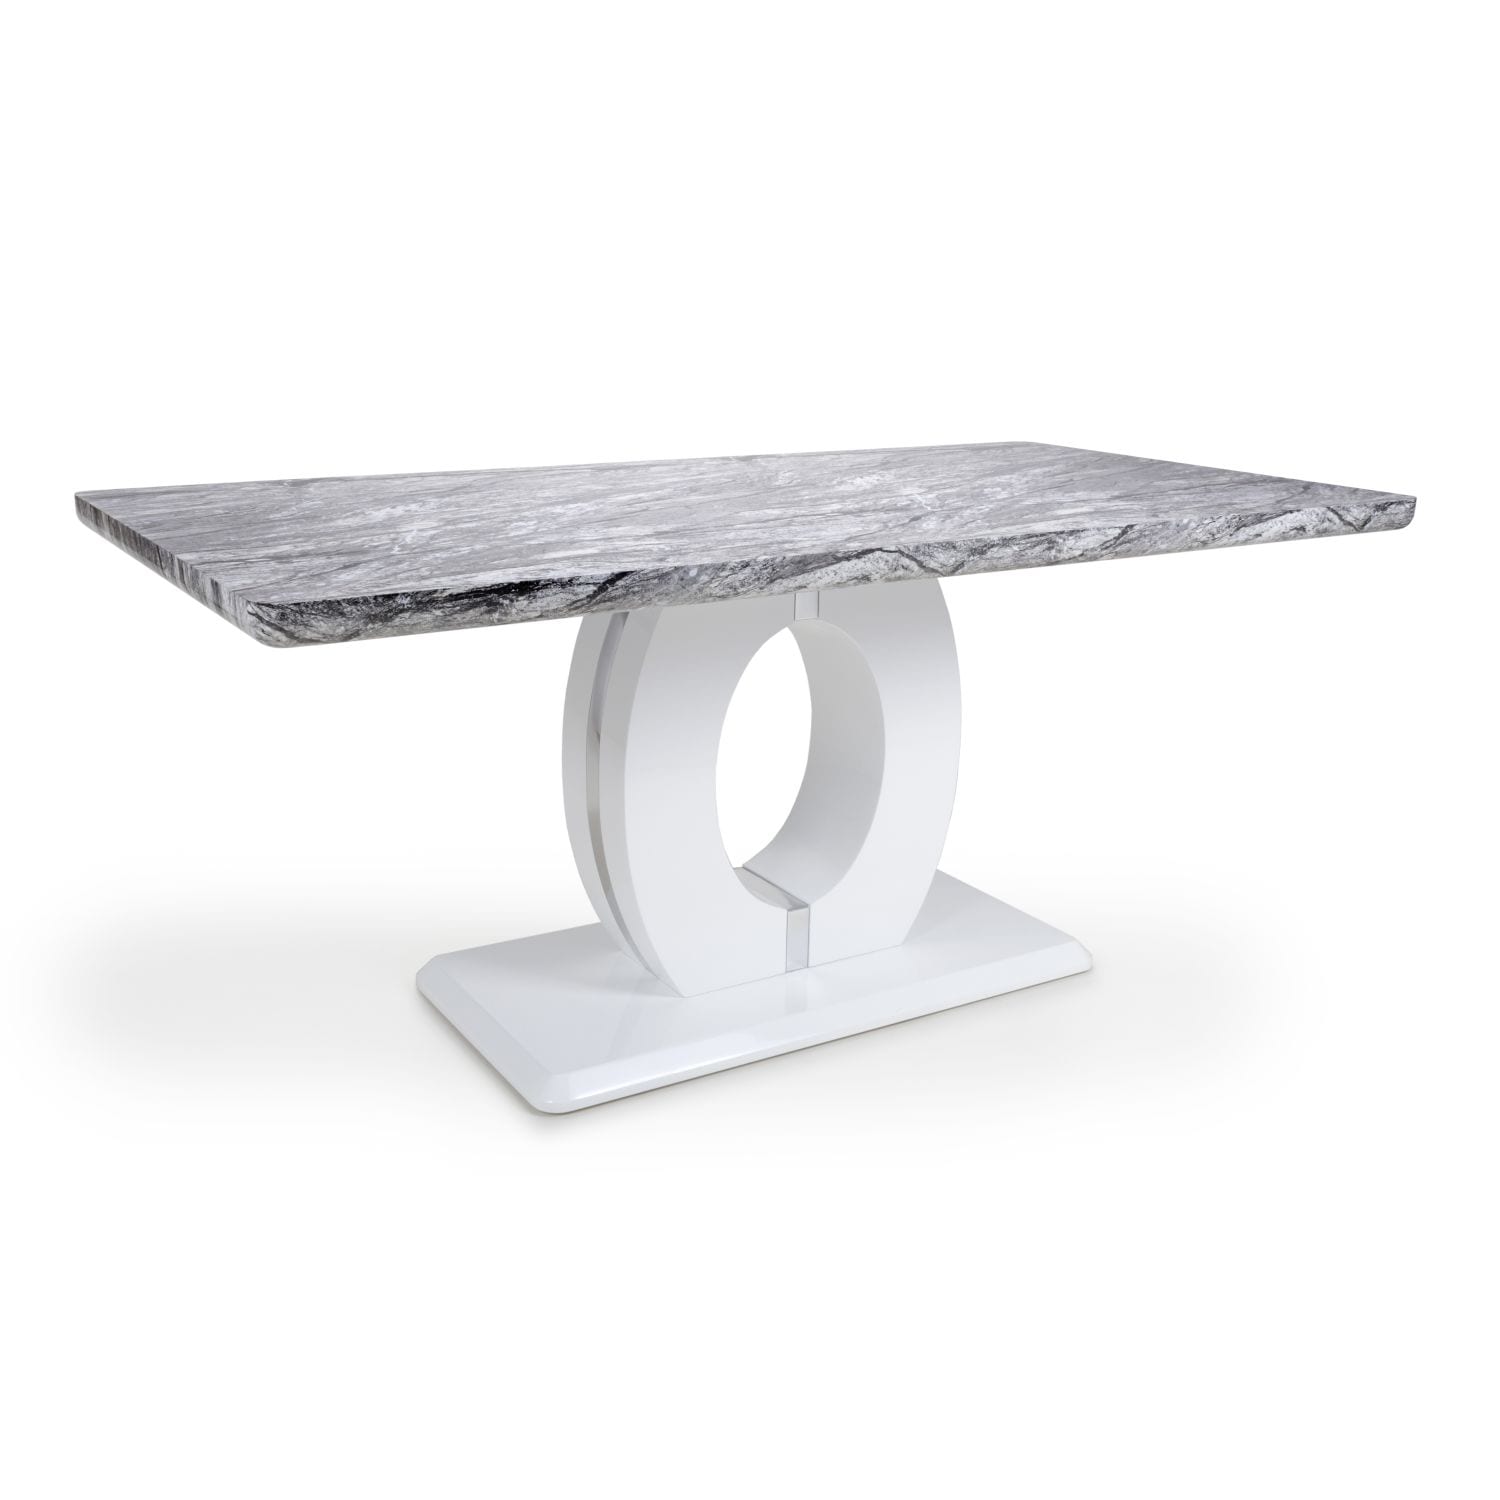 Poseidon Large Marble Effect Top Table